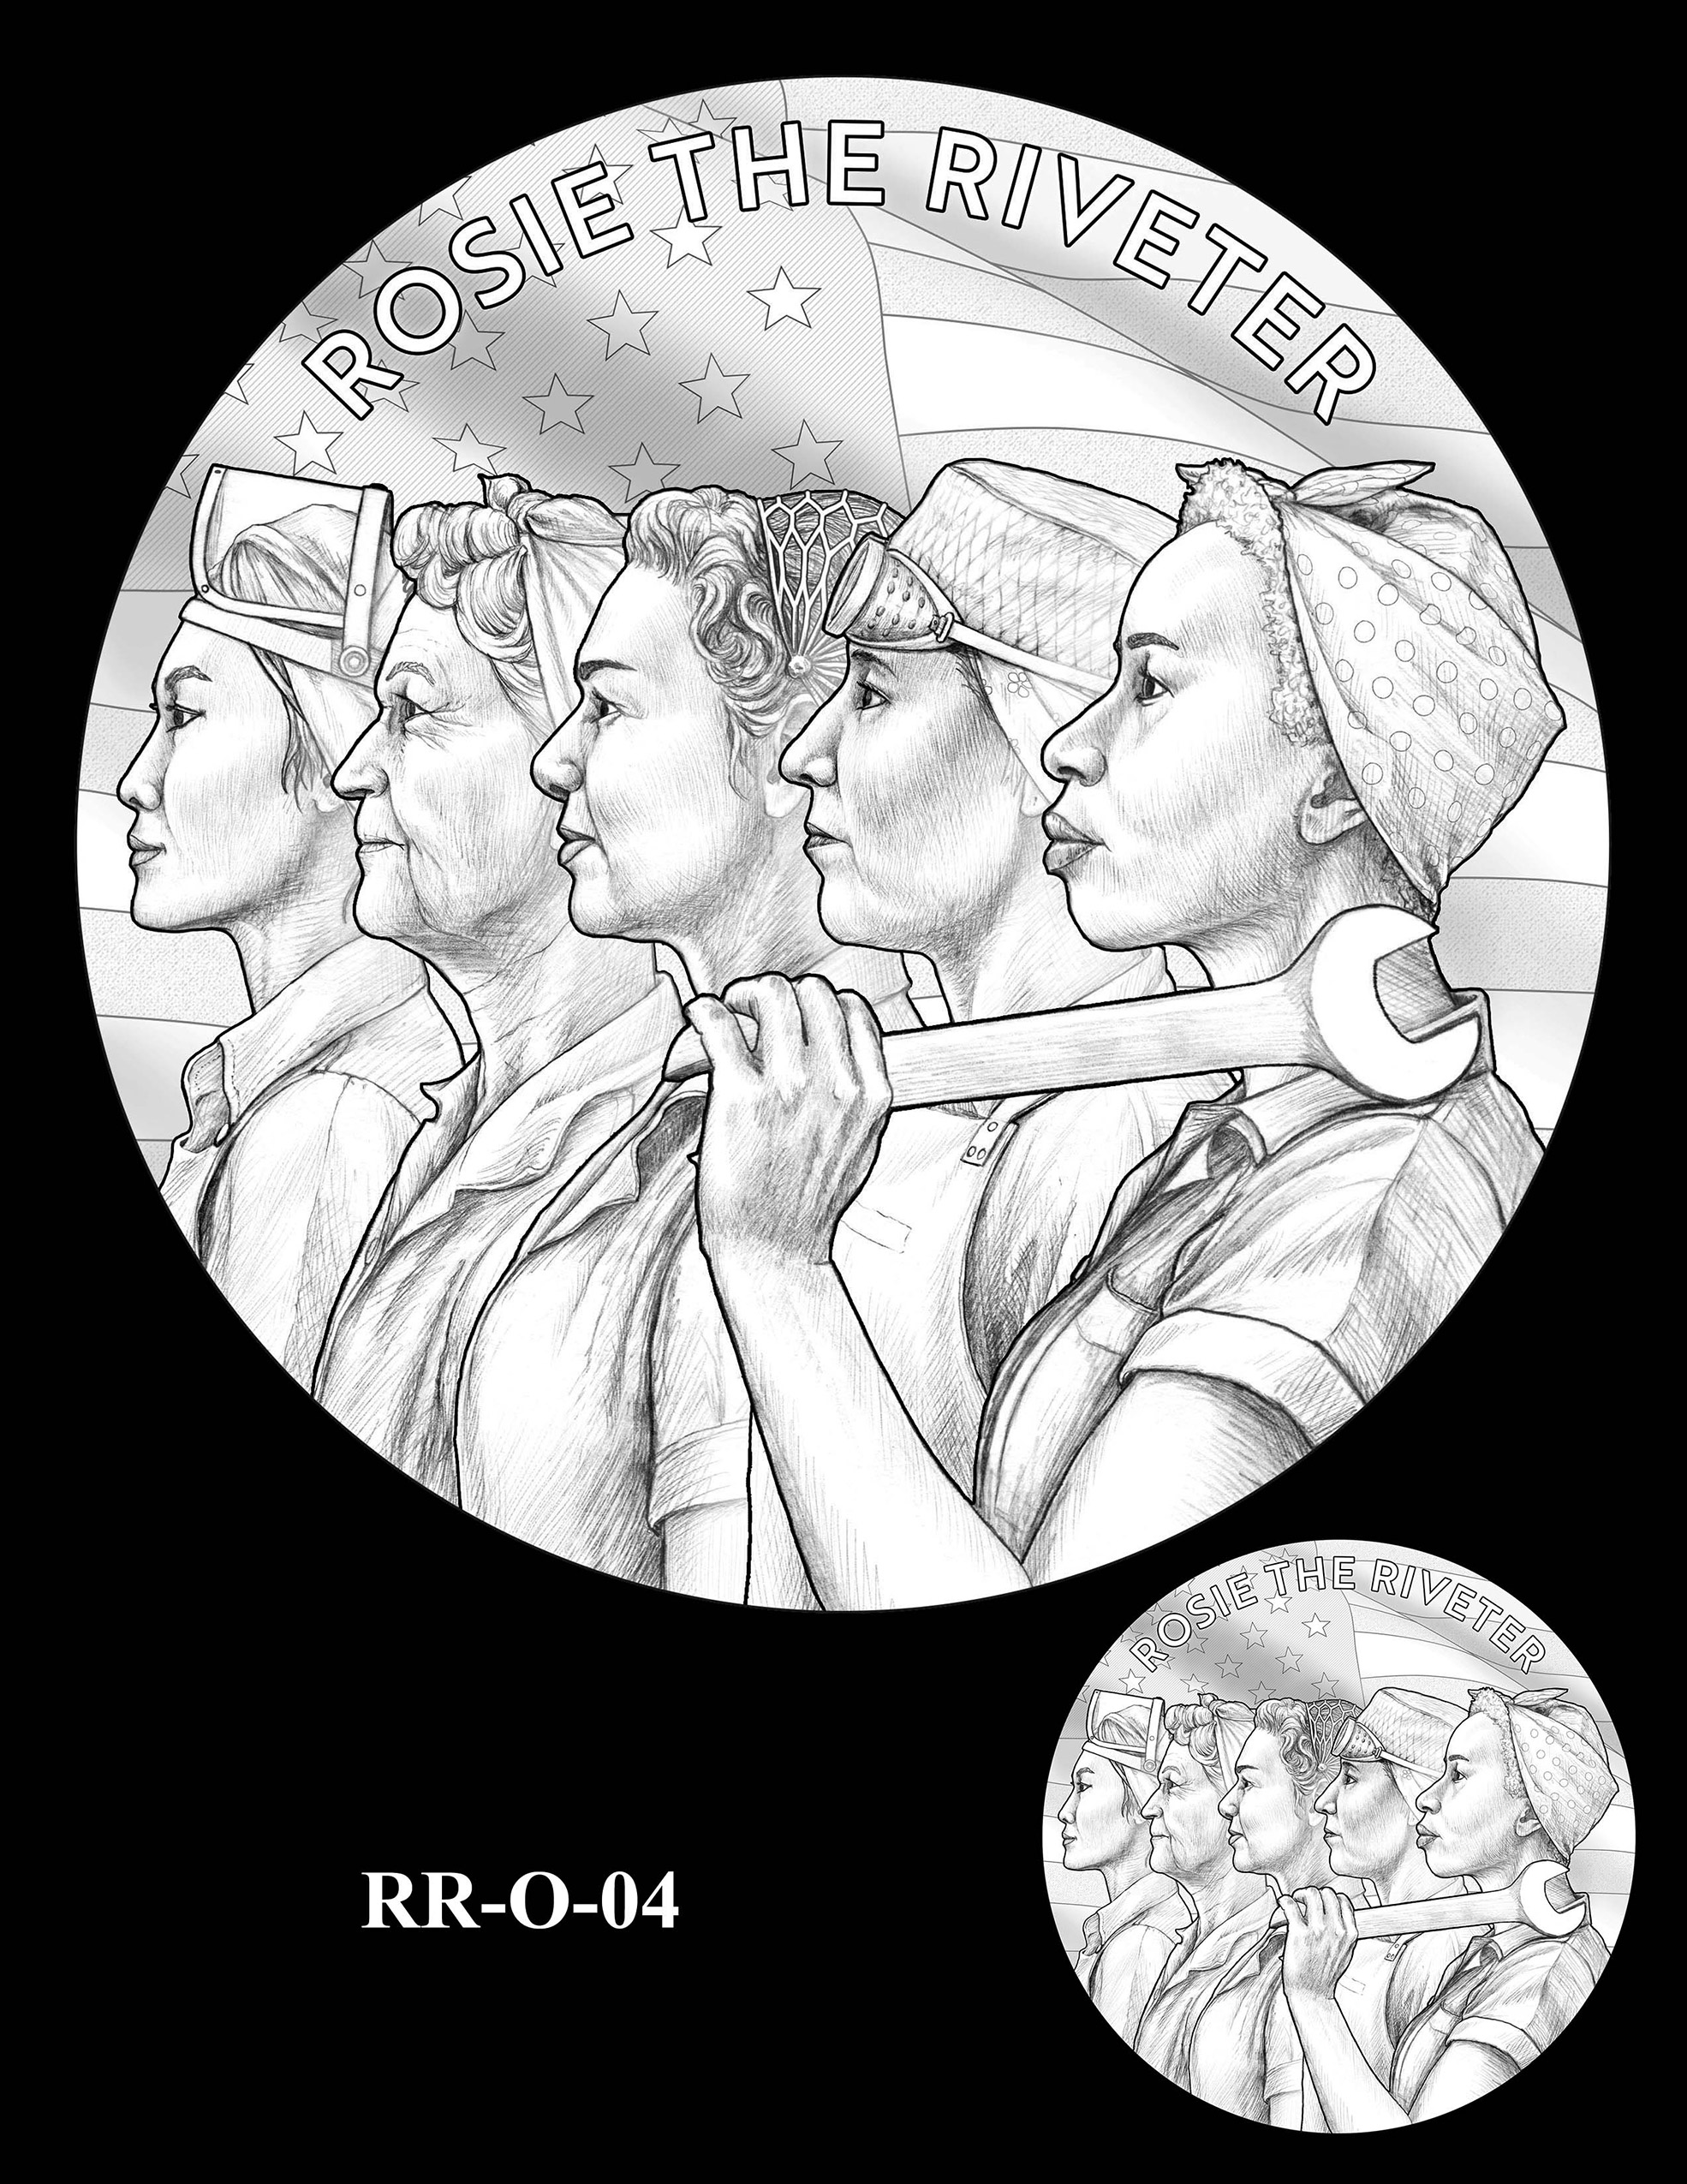 RR-O-04 -- Rosie the Riveter Congressional Gold Medal